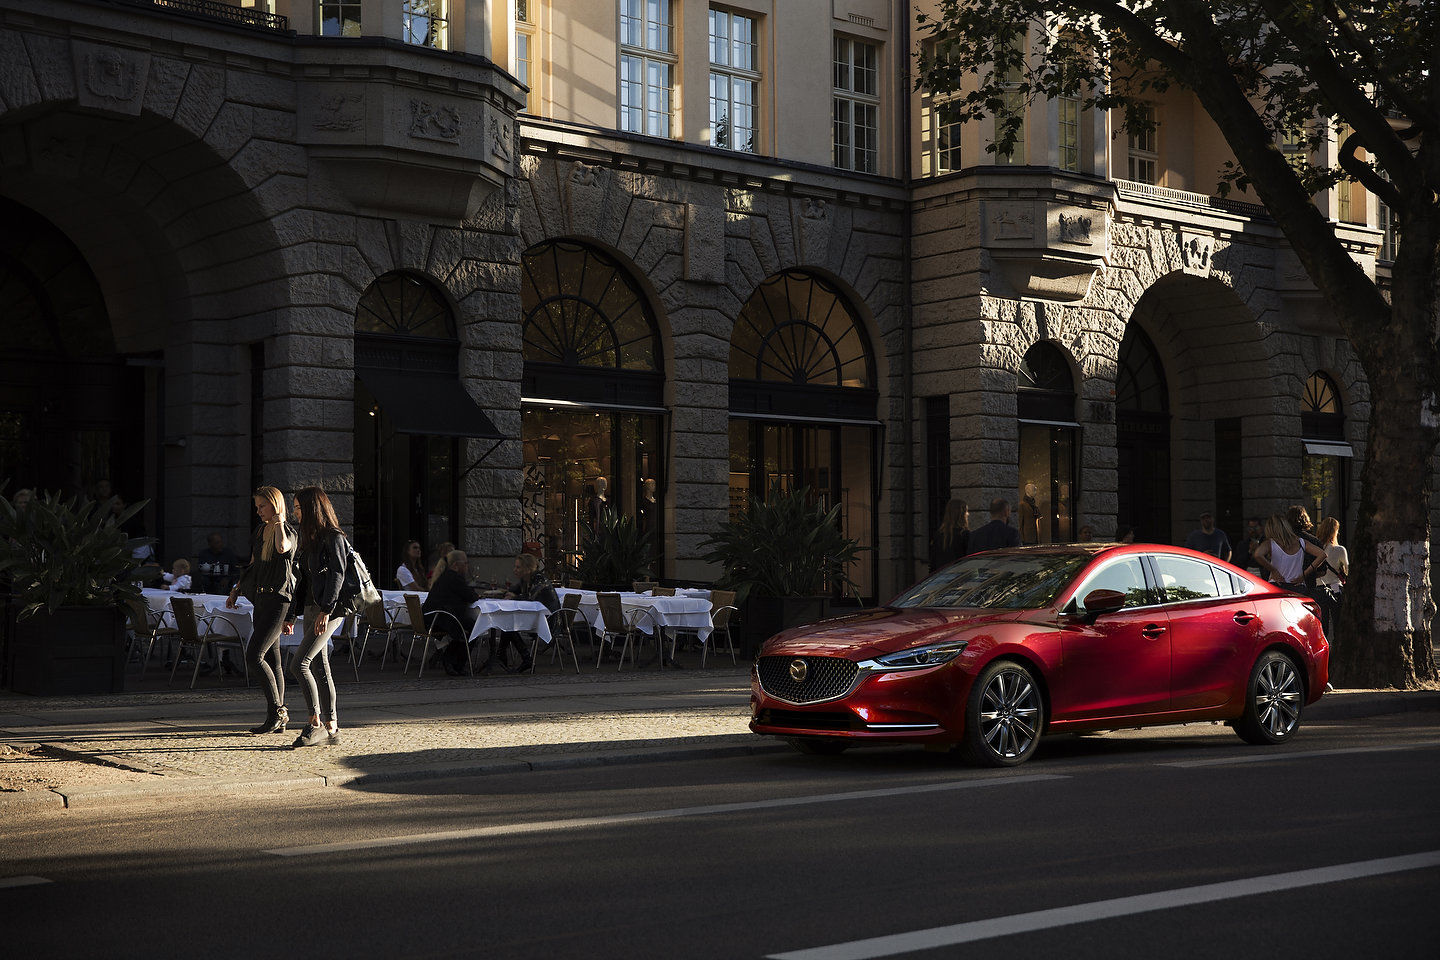 The 2019 Mazda6: The new Mazda6 flagship sedan is designed to please all your senses.